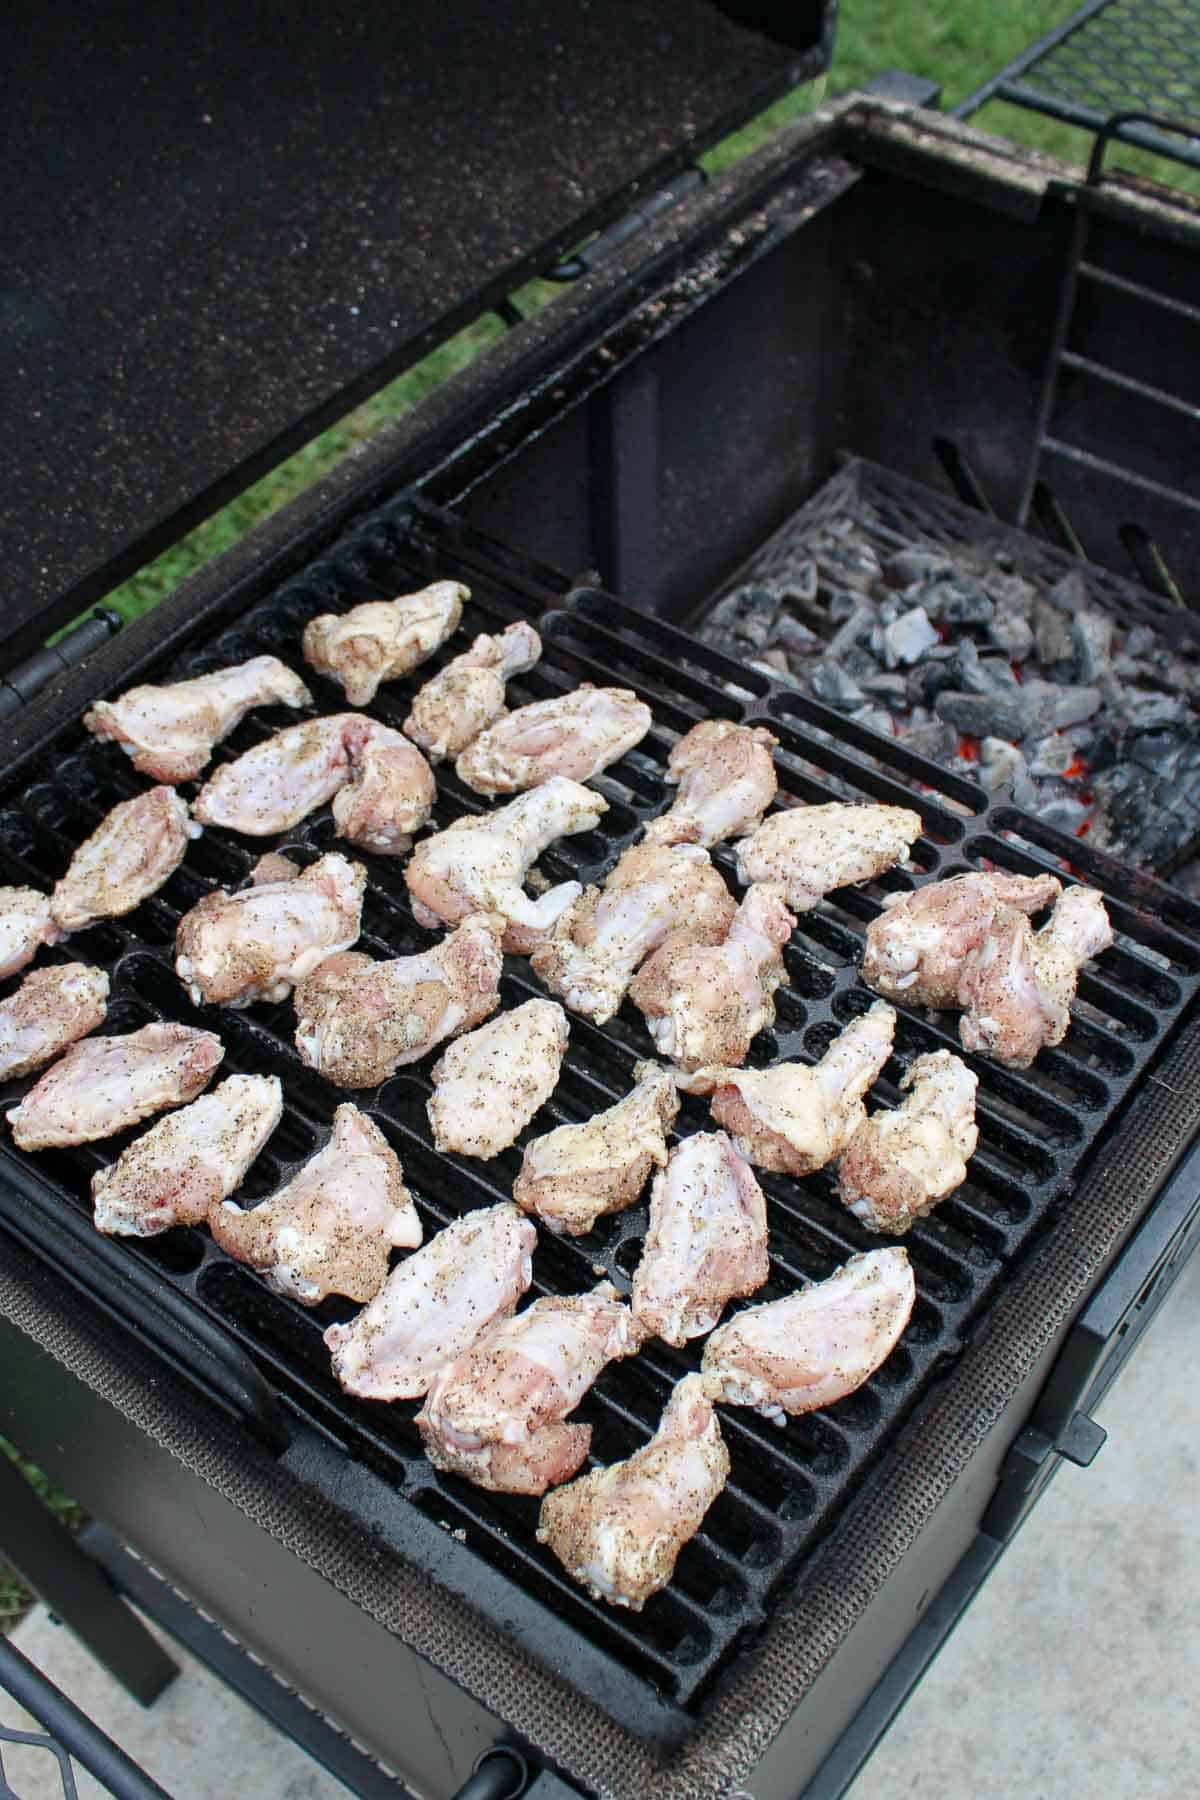 uncooked chicken wings lined on a grill grate